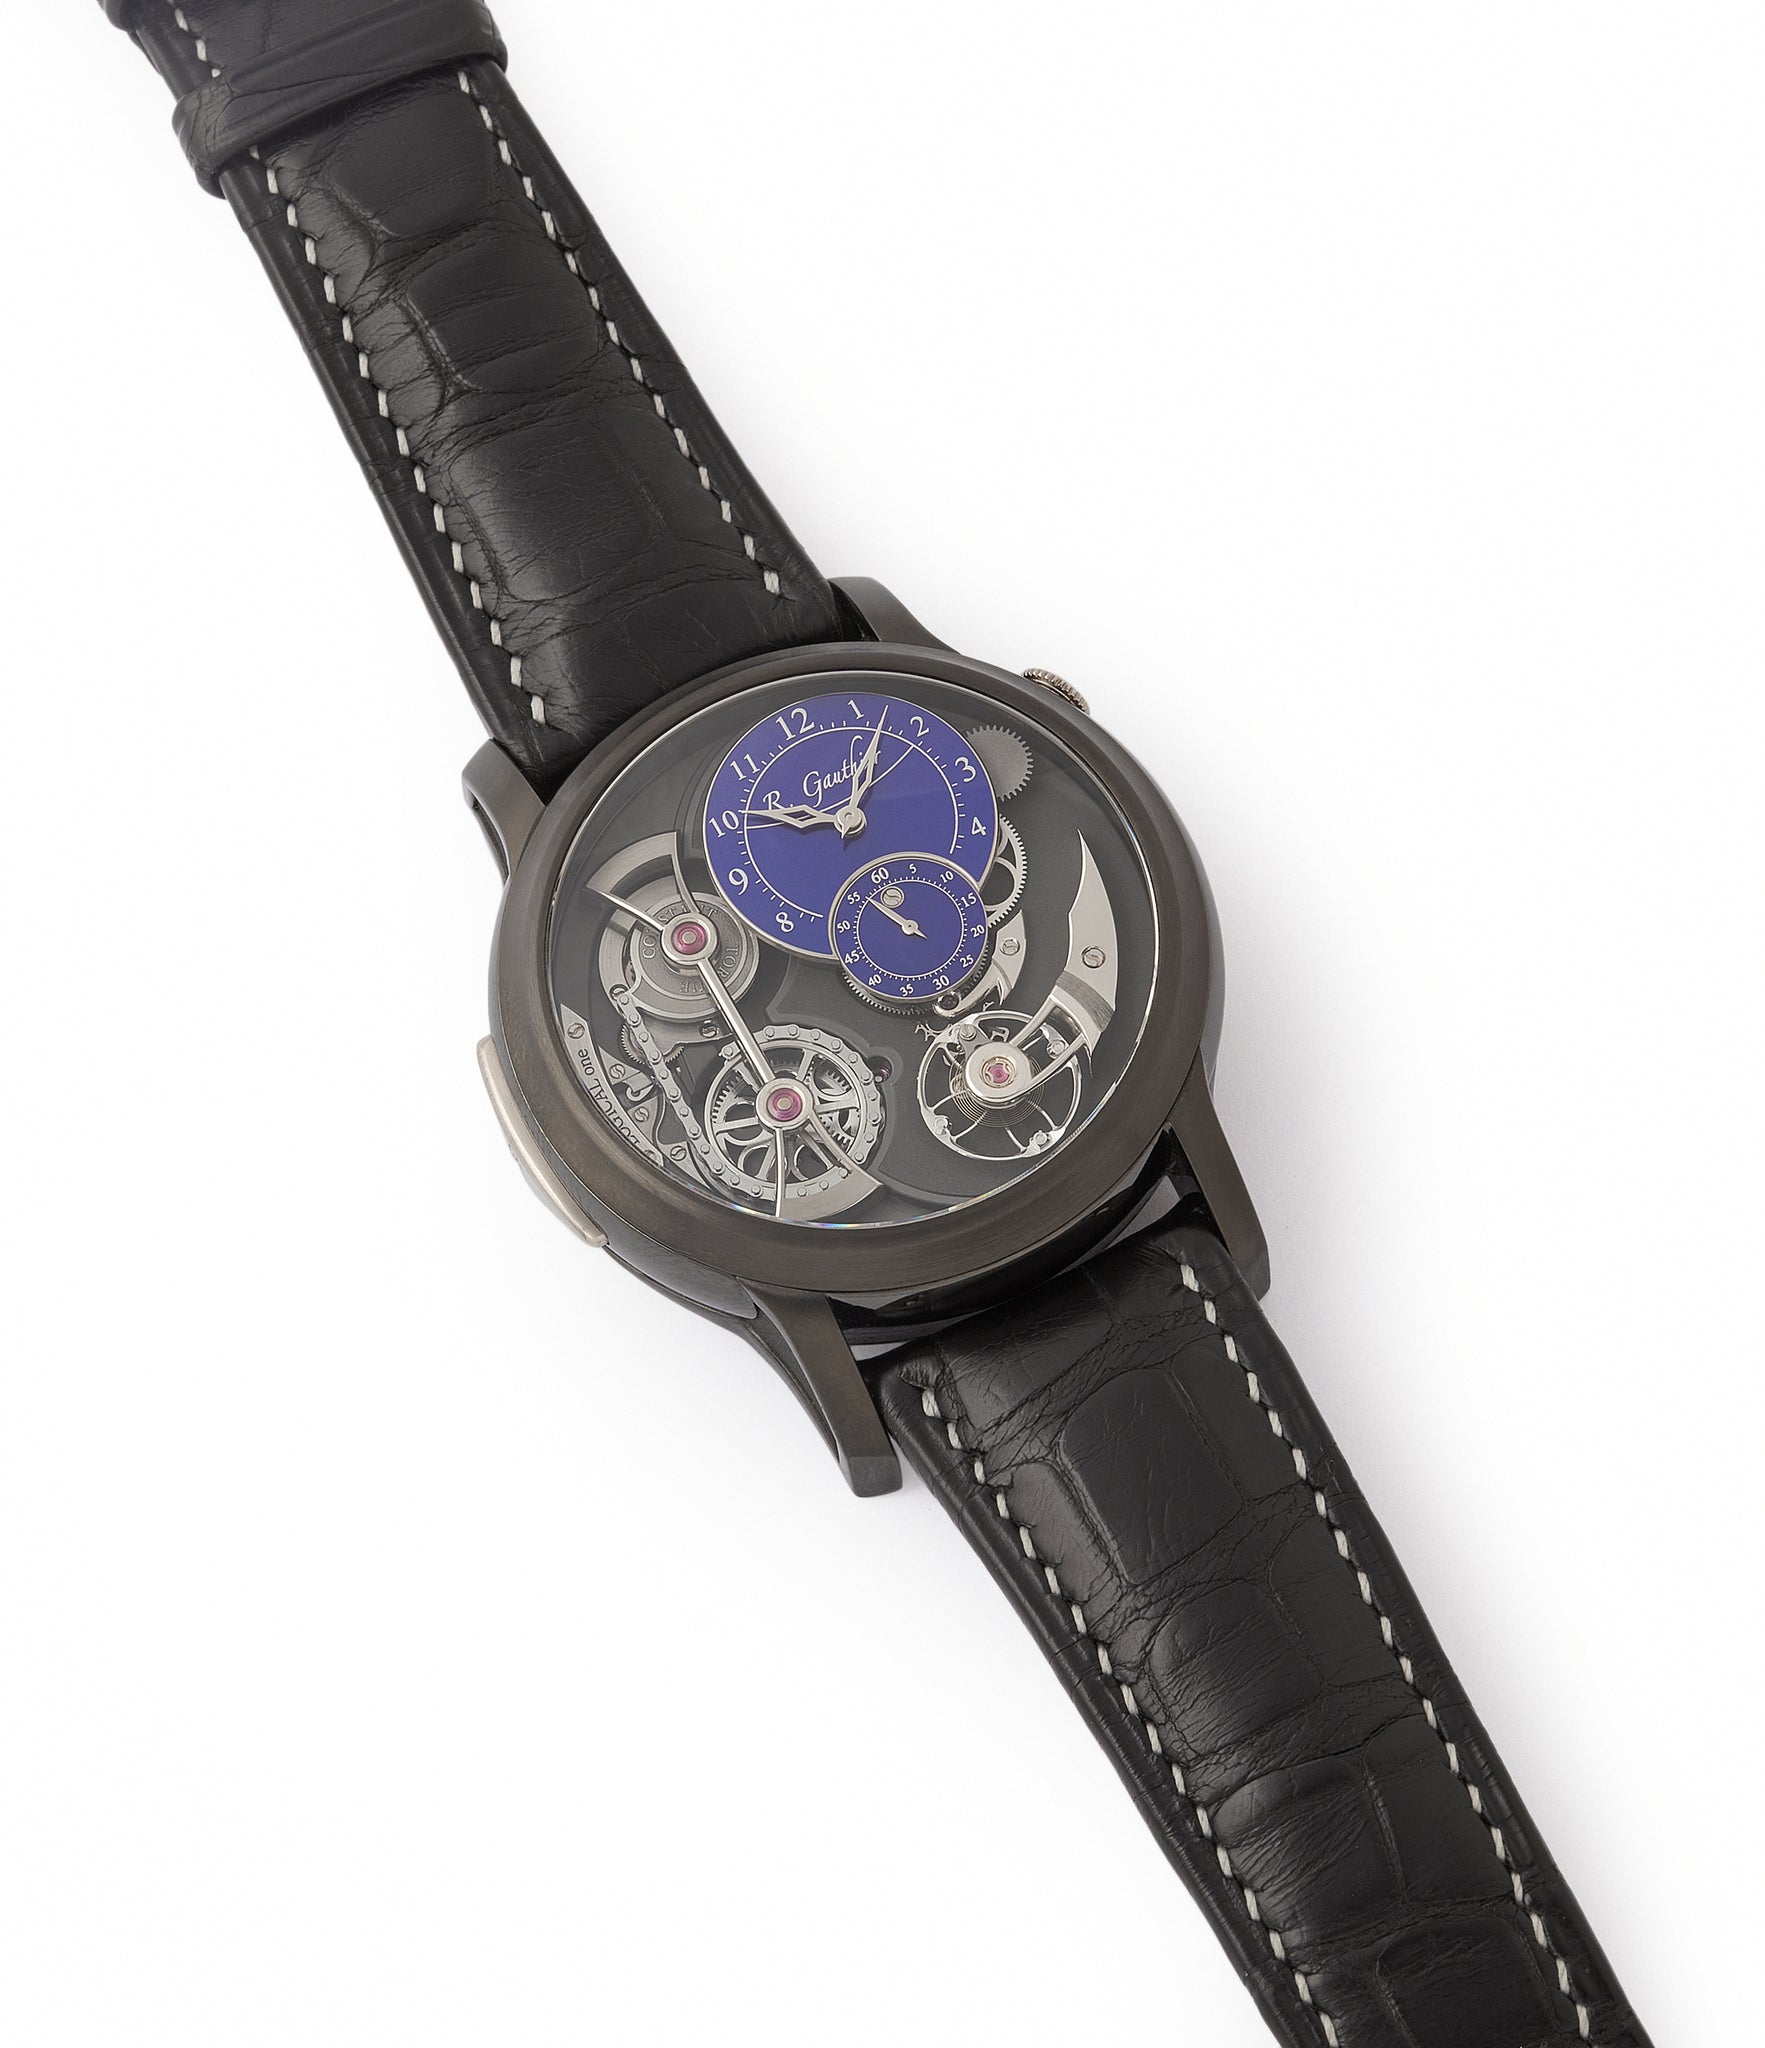 shop Romain Gauthier Limited Edition Logical One BTG titanium watch blue enamel dial for sale online at A Collected Man London UK specialist of independent watchmakers